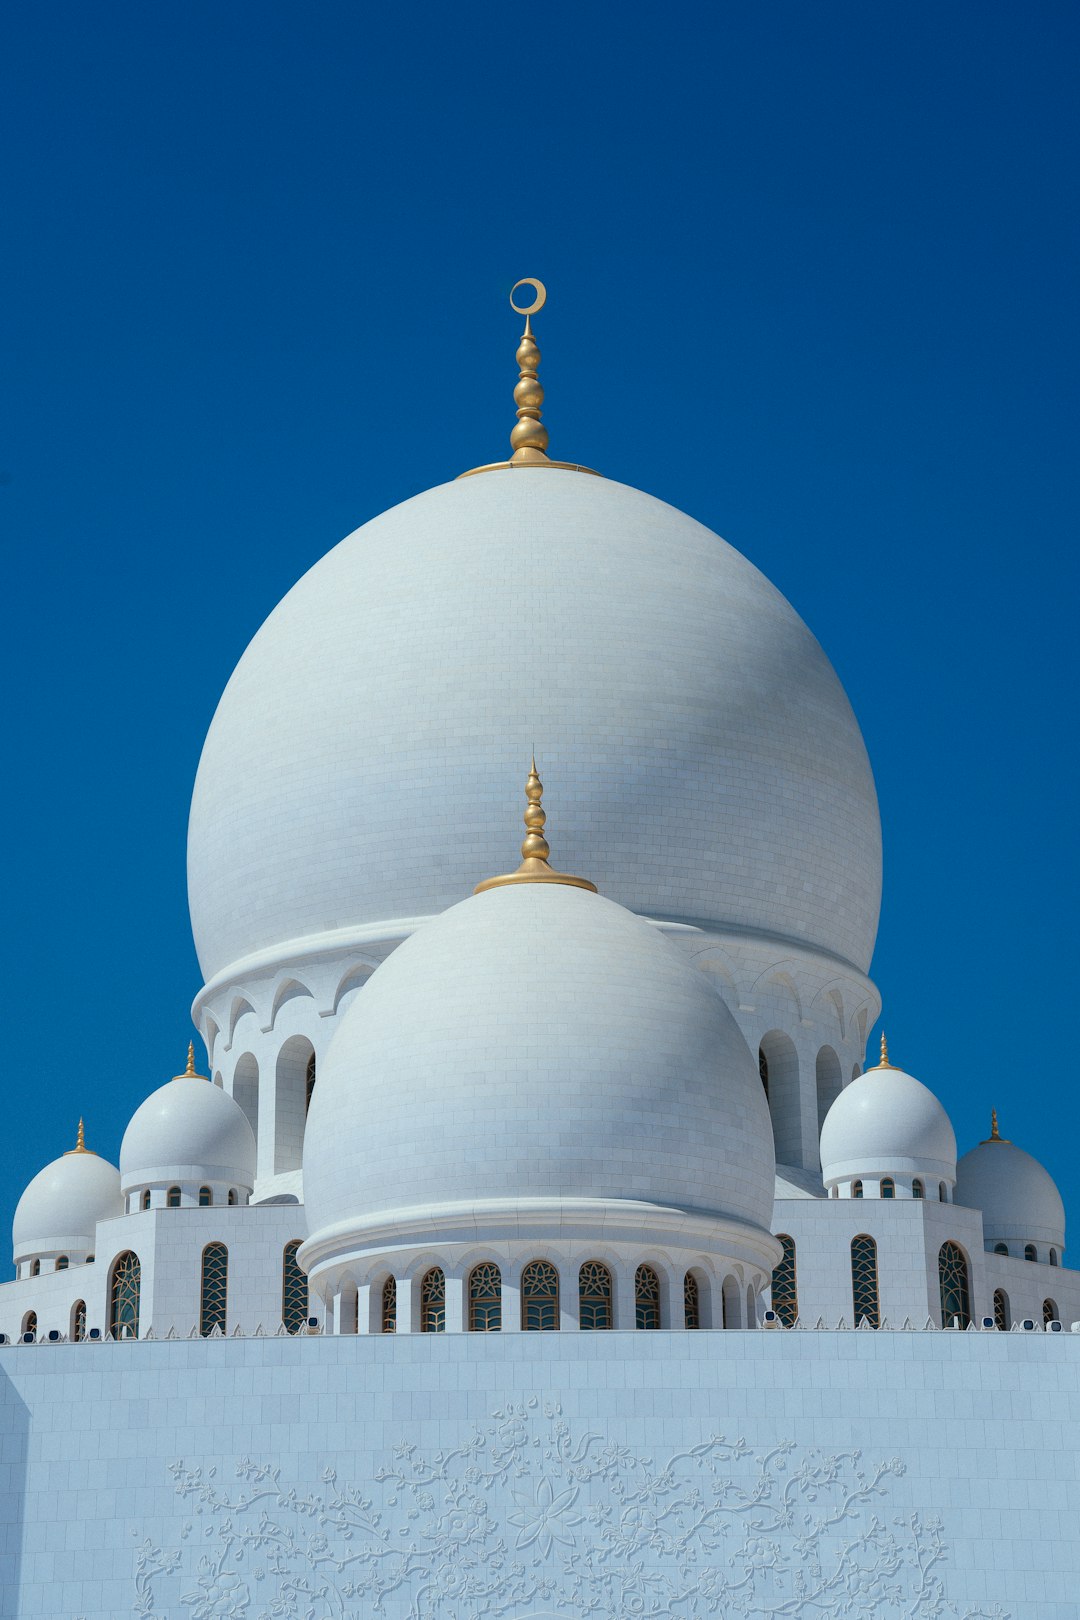 travelers stories about Landmark in Sheikh Zayed Grand Mosque center - 5th St - Abu Dhabi - United Arab Emirates, United Arab Emirates